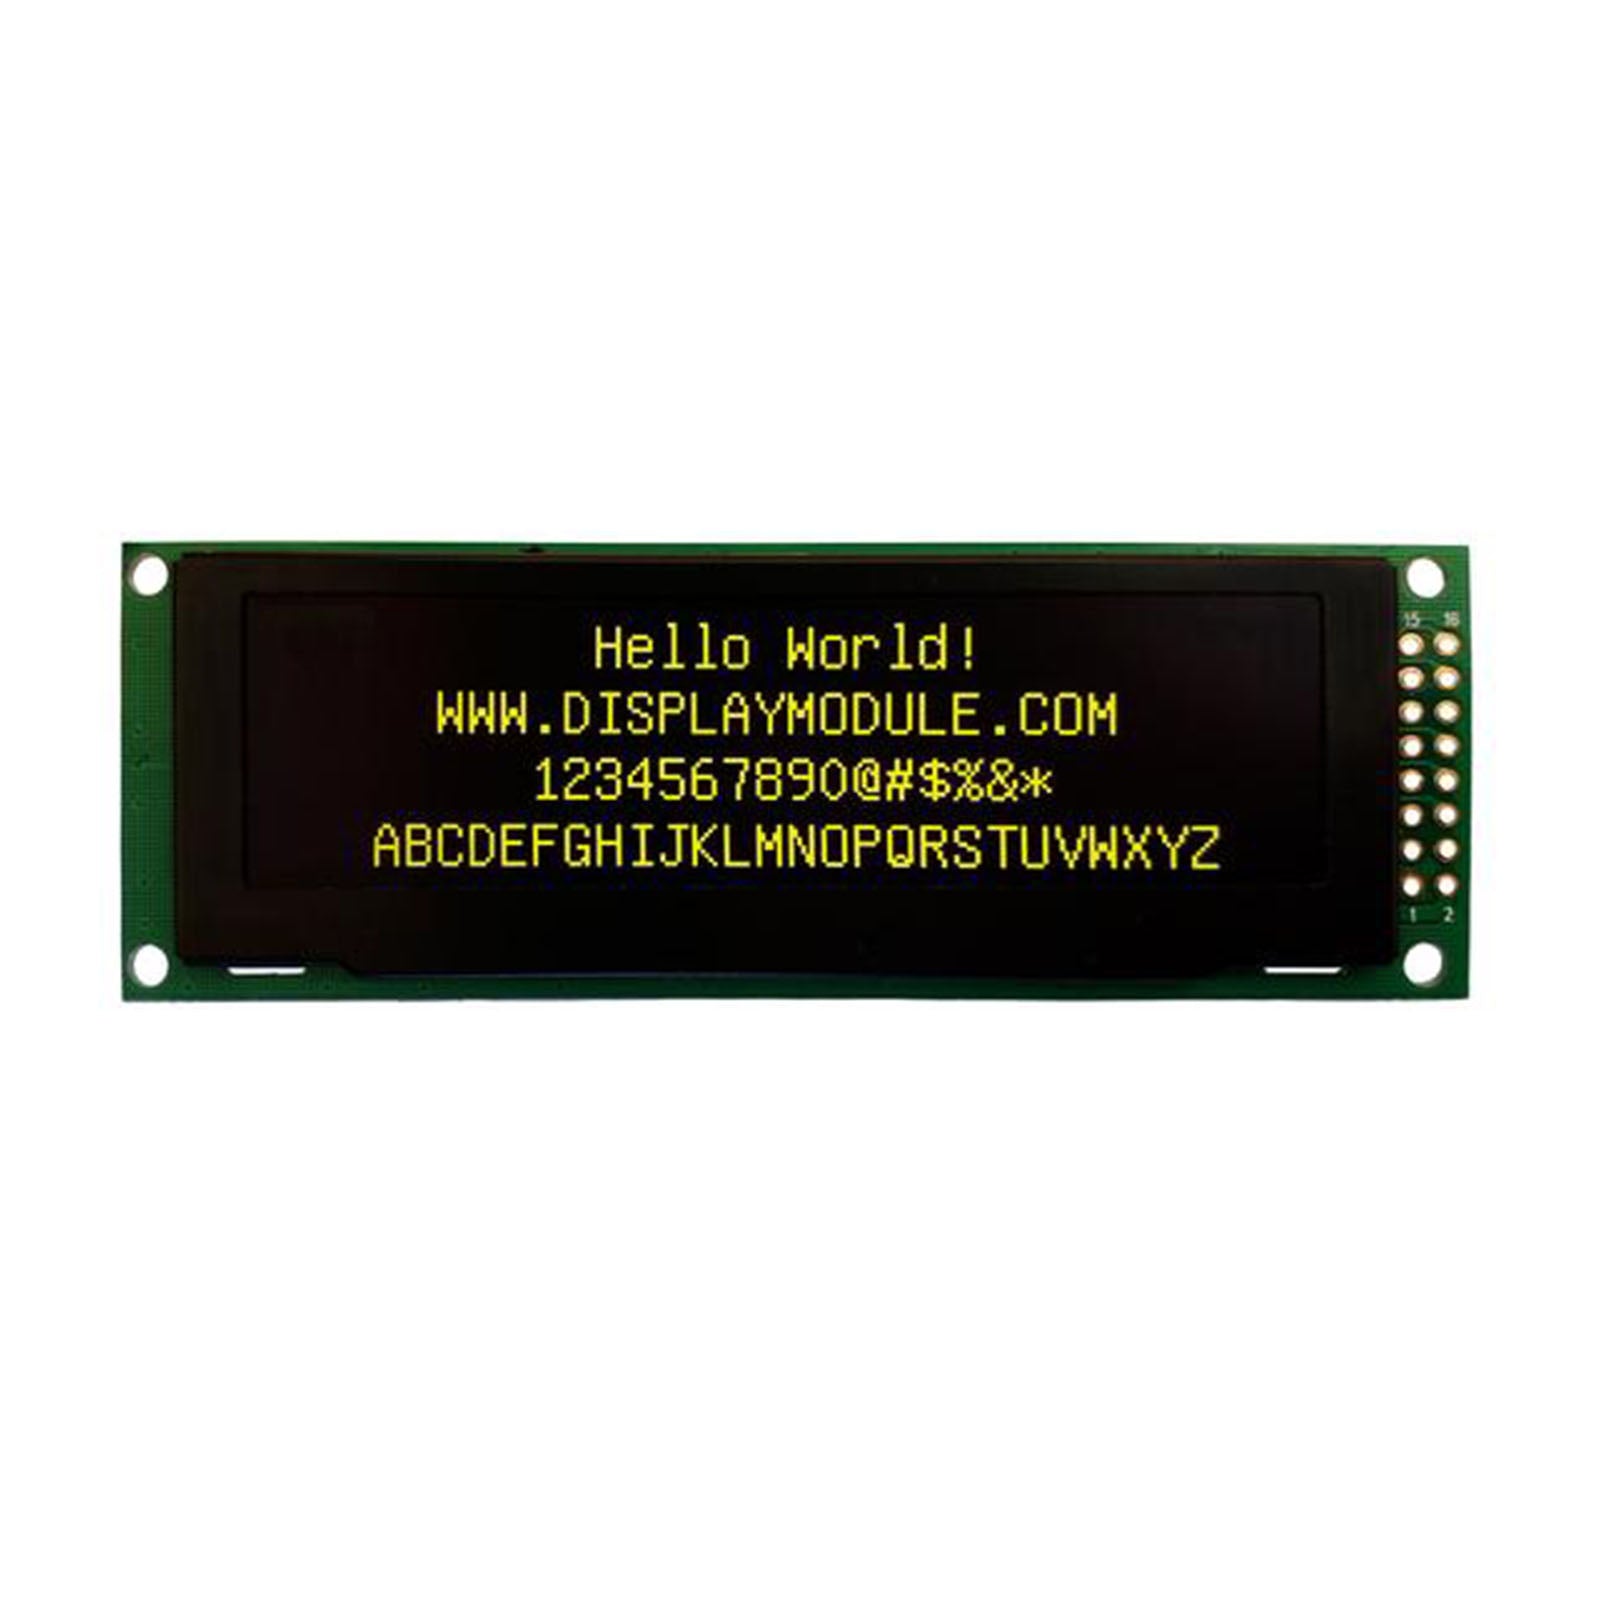 2.8-inch 256x64 monochrome OLED screen displaying yellow characters